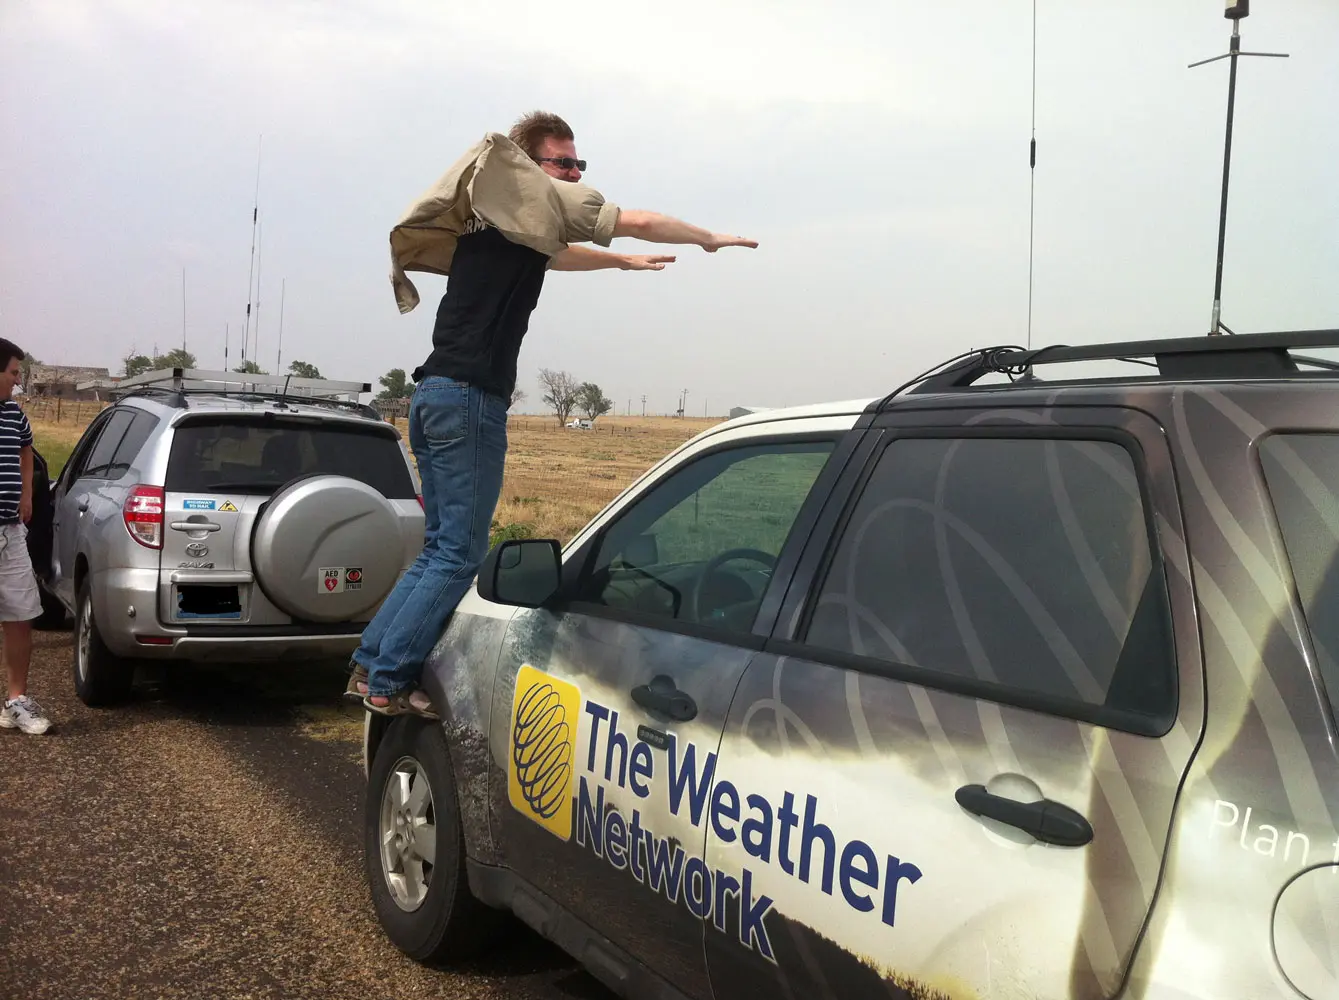 How storm chasers safely weather the whirlwind of COVID-19 restrictions